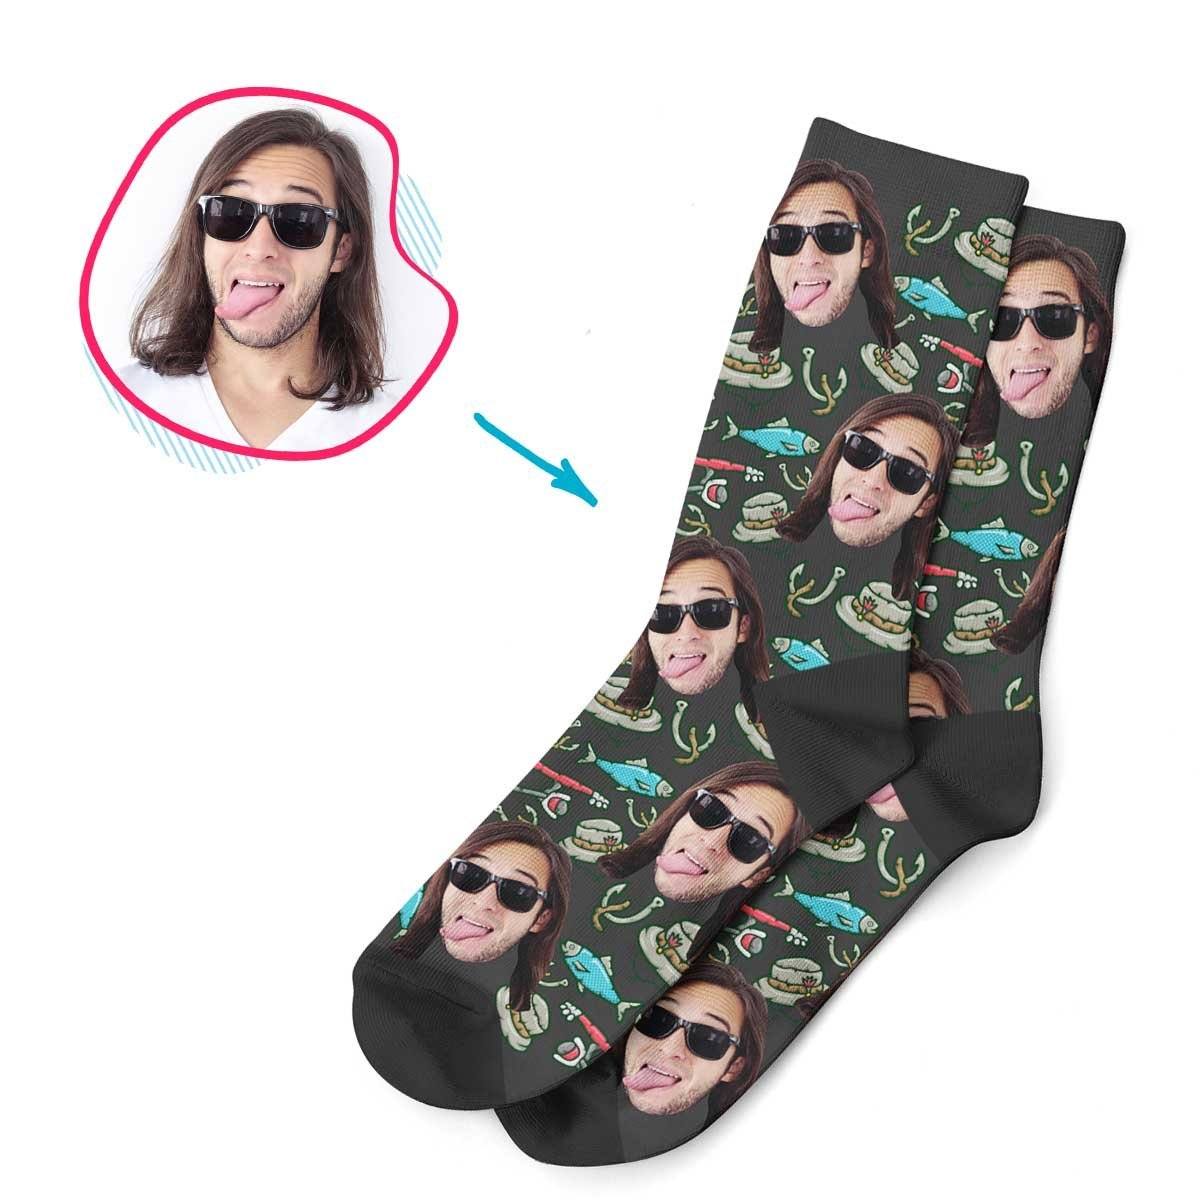 Dark Fishing personalized socks with photo of face printed on them